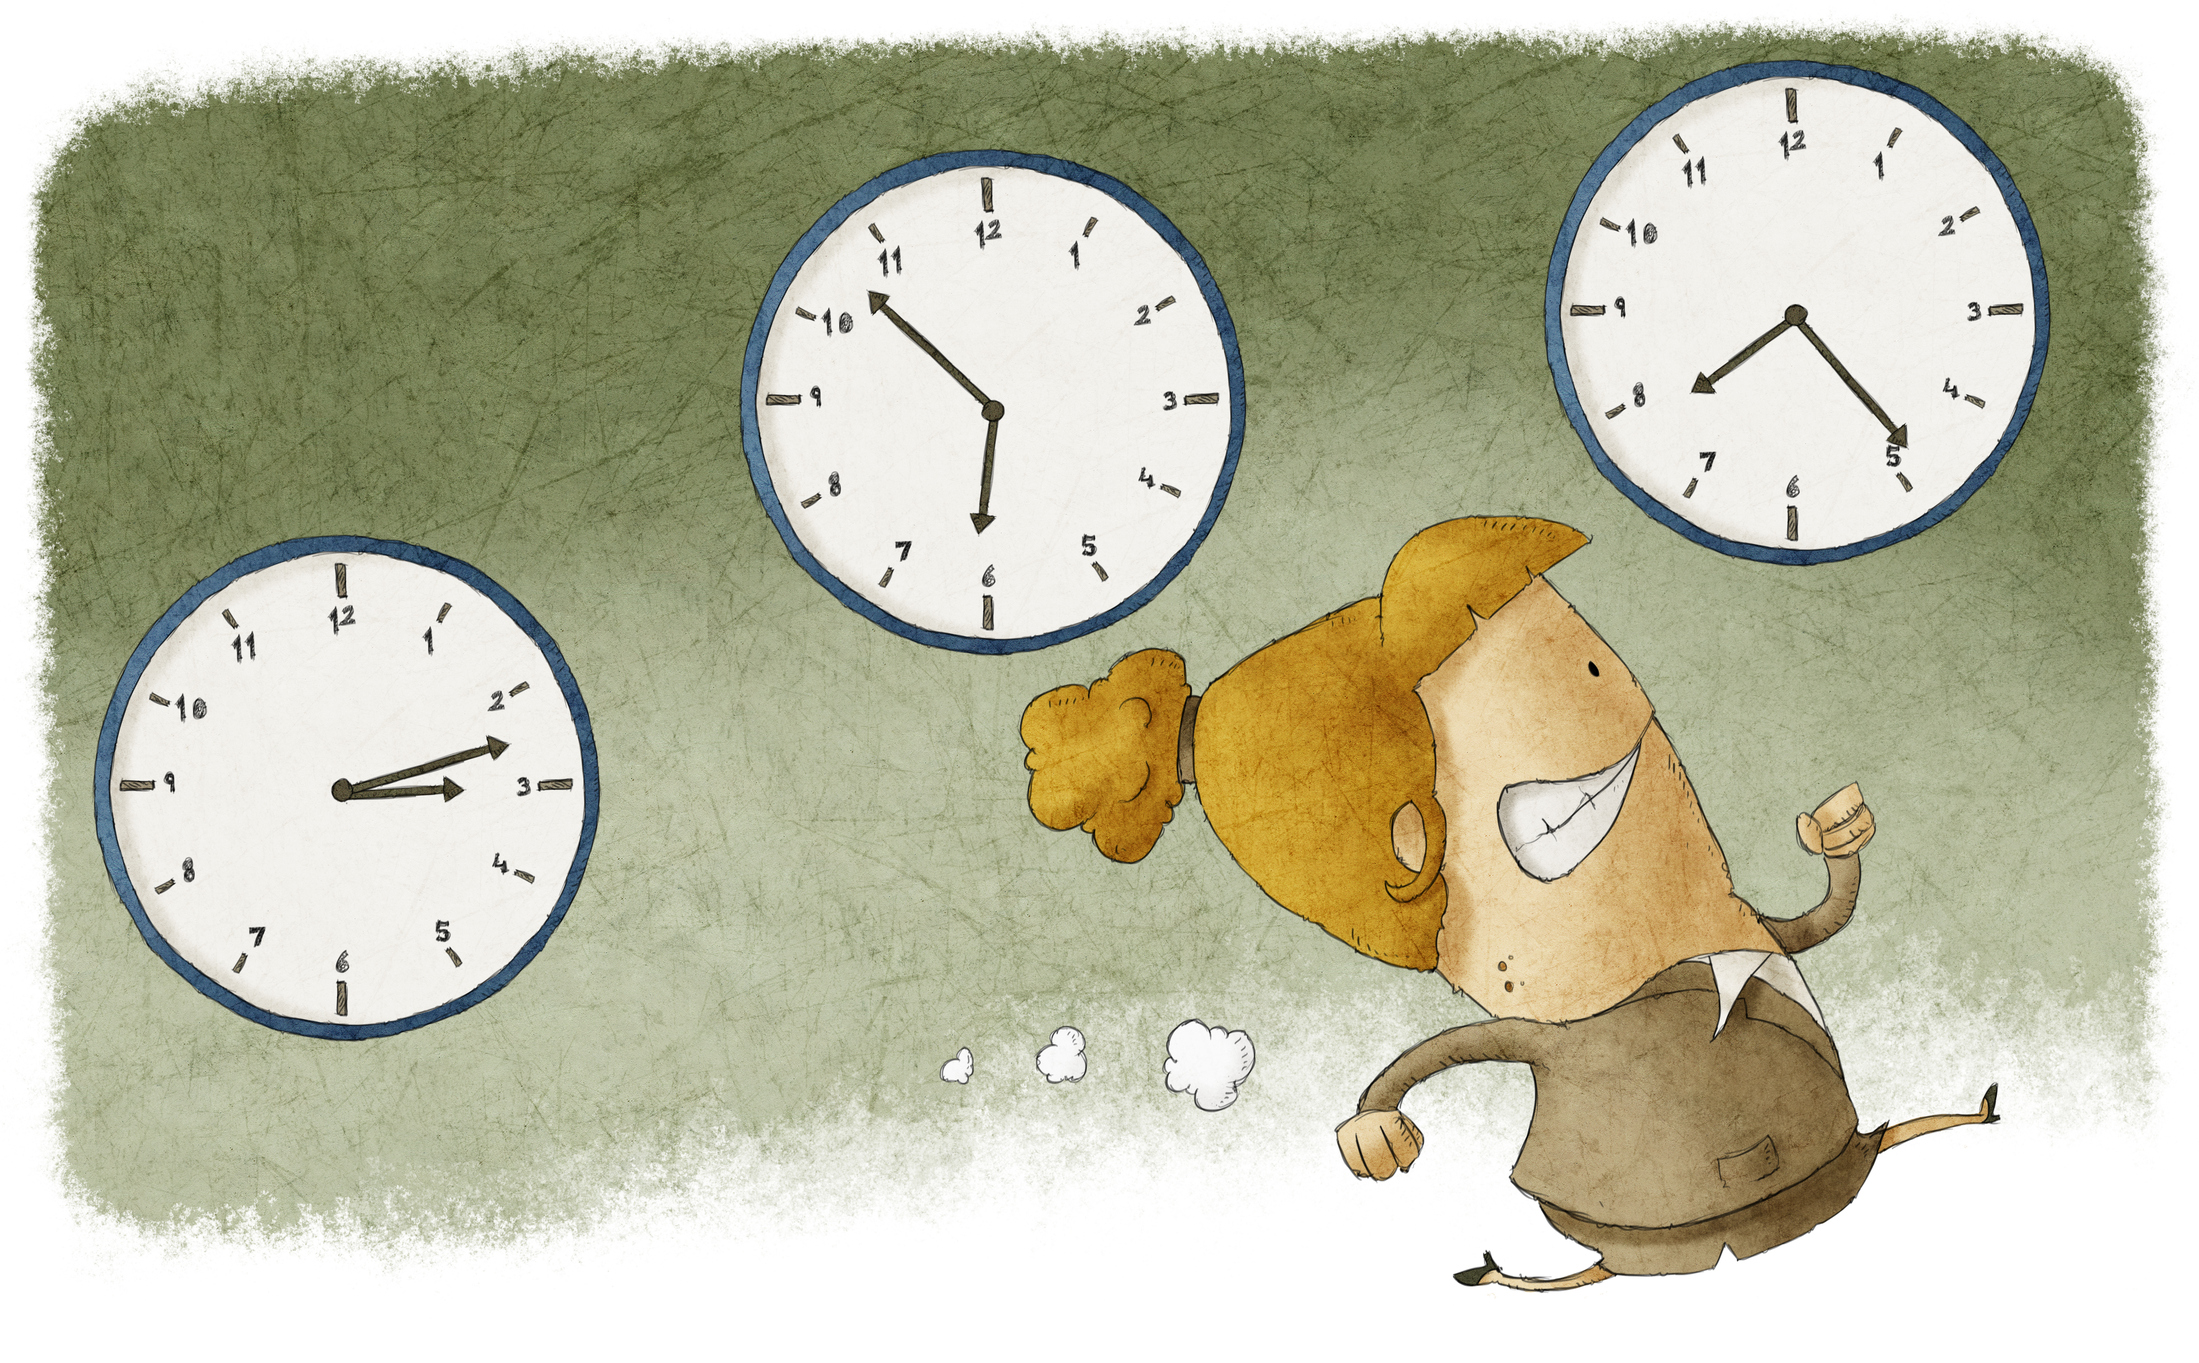 3 Better Ways to Say “I Don't Have Time for This Right Now”